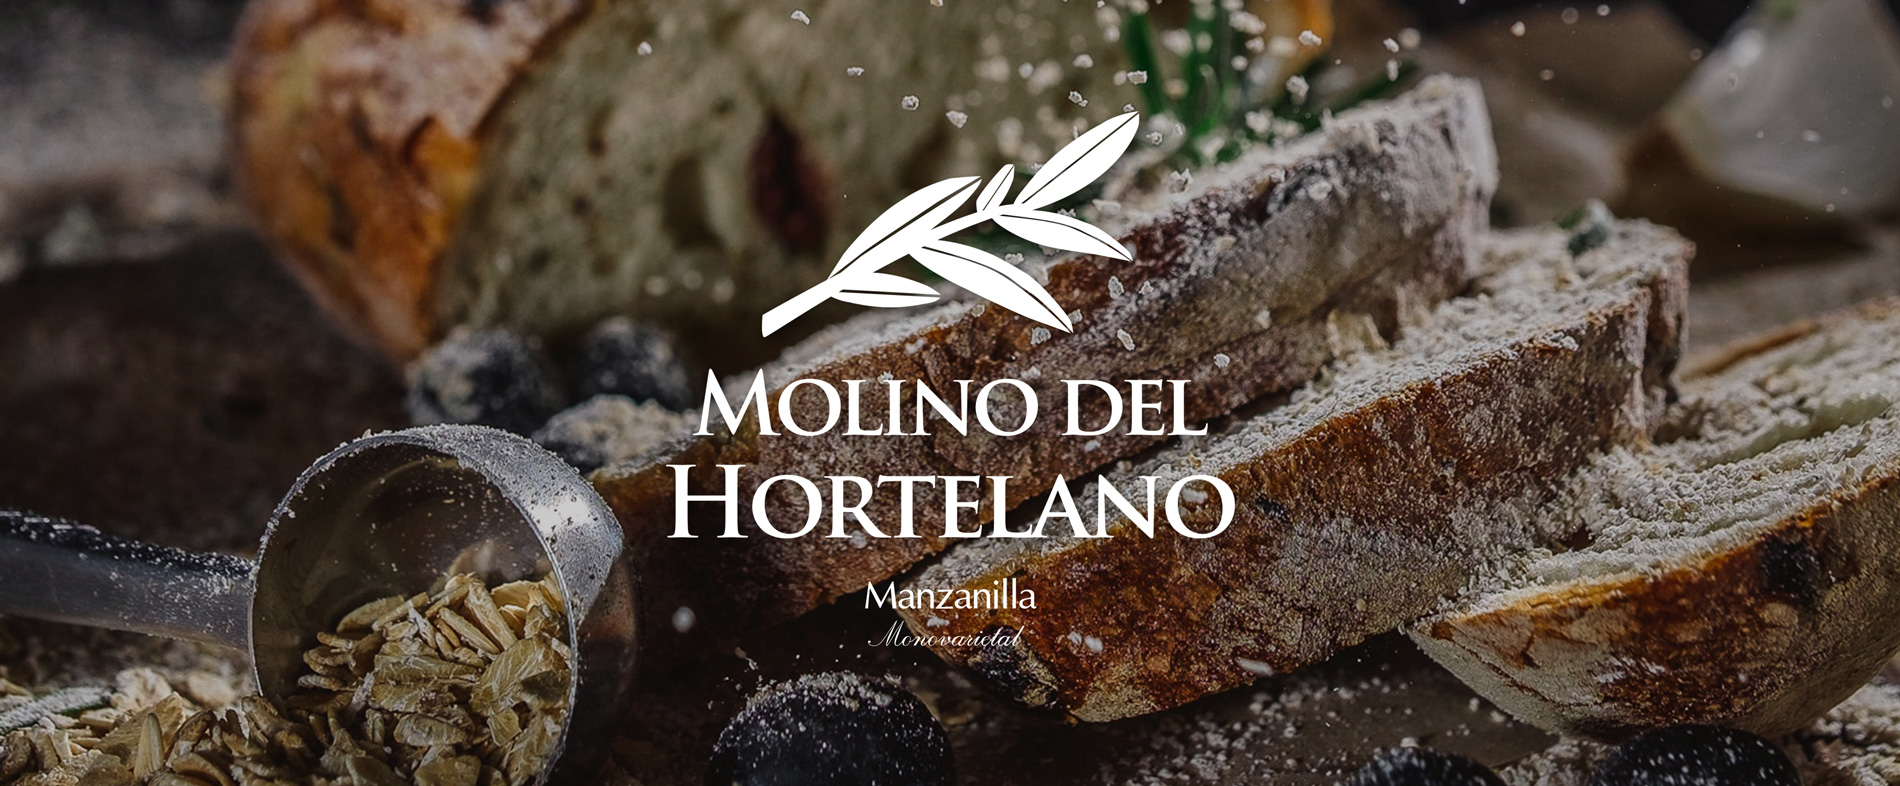 Portfolio of graphic and creative design works of extra virgin olive oil label design and packaging for artisan MOLINO DEL HORTELANO